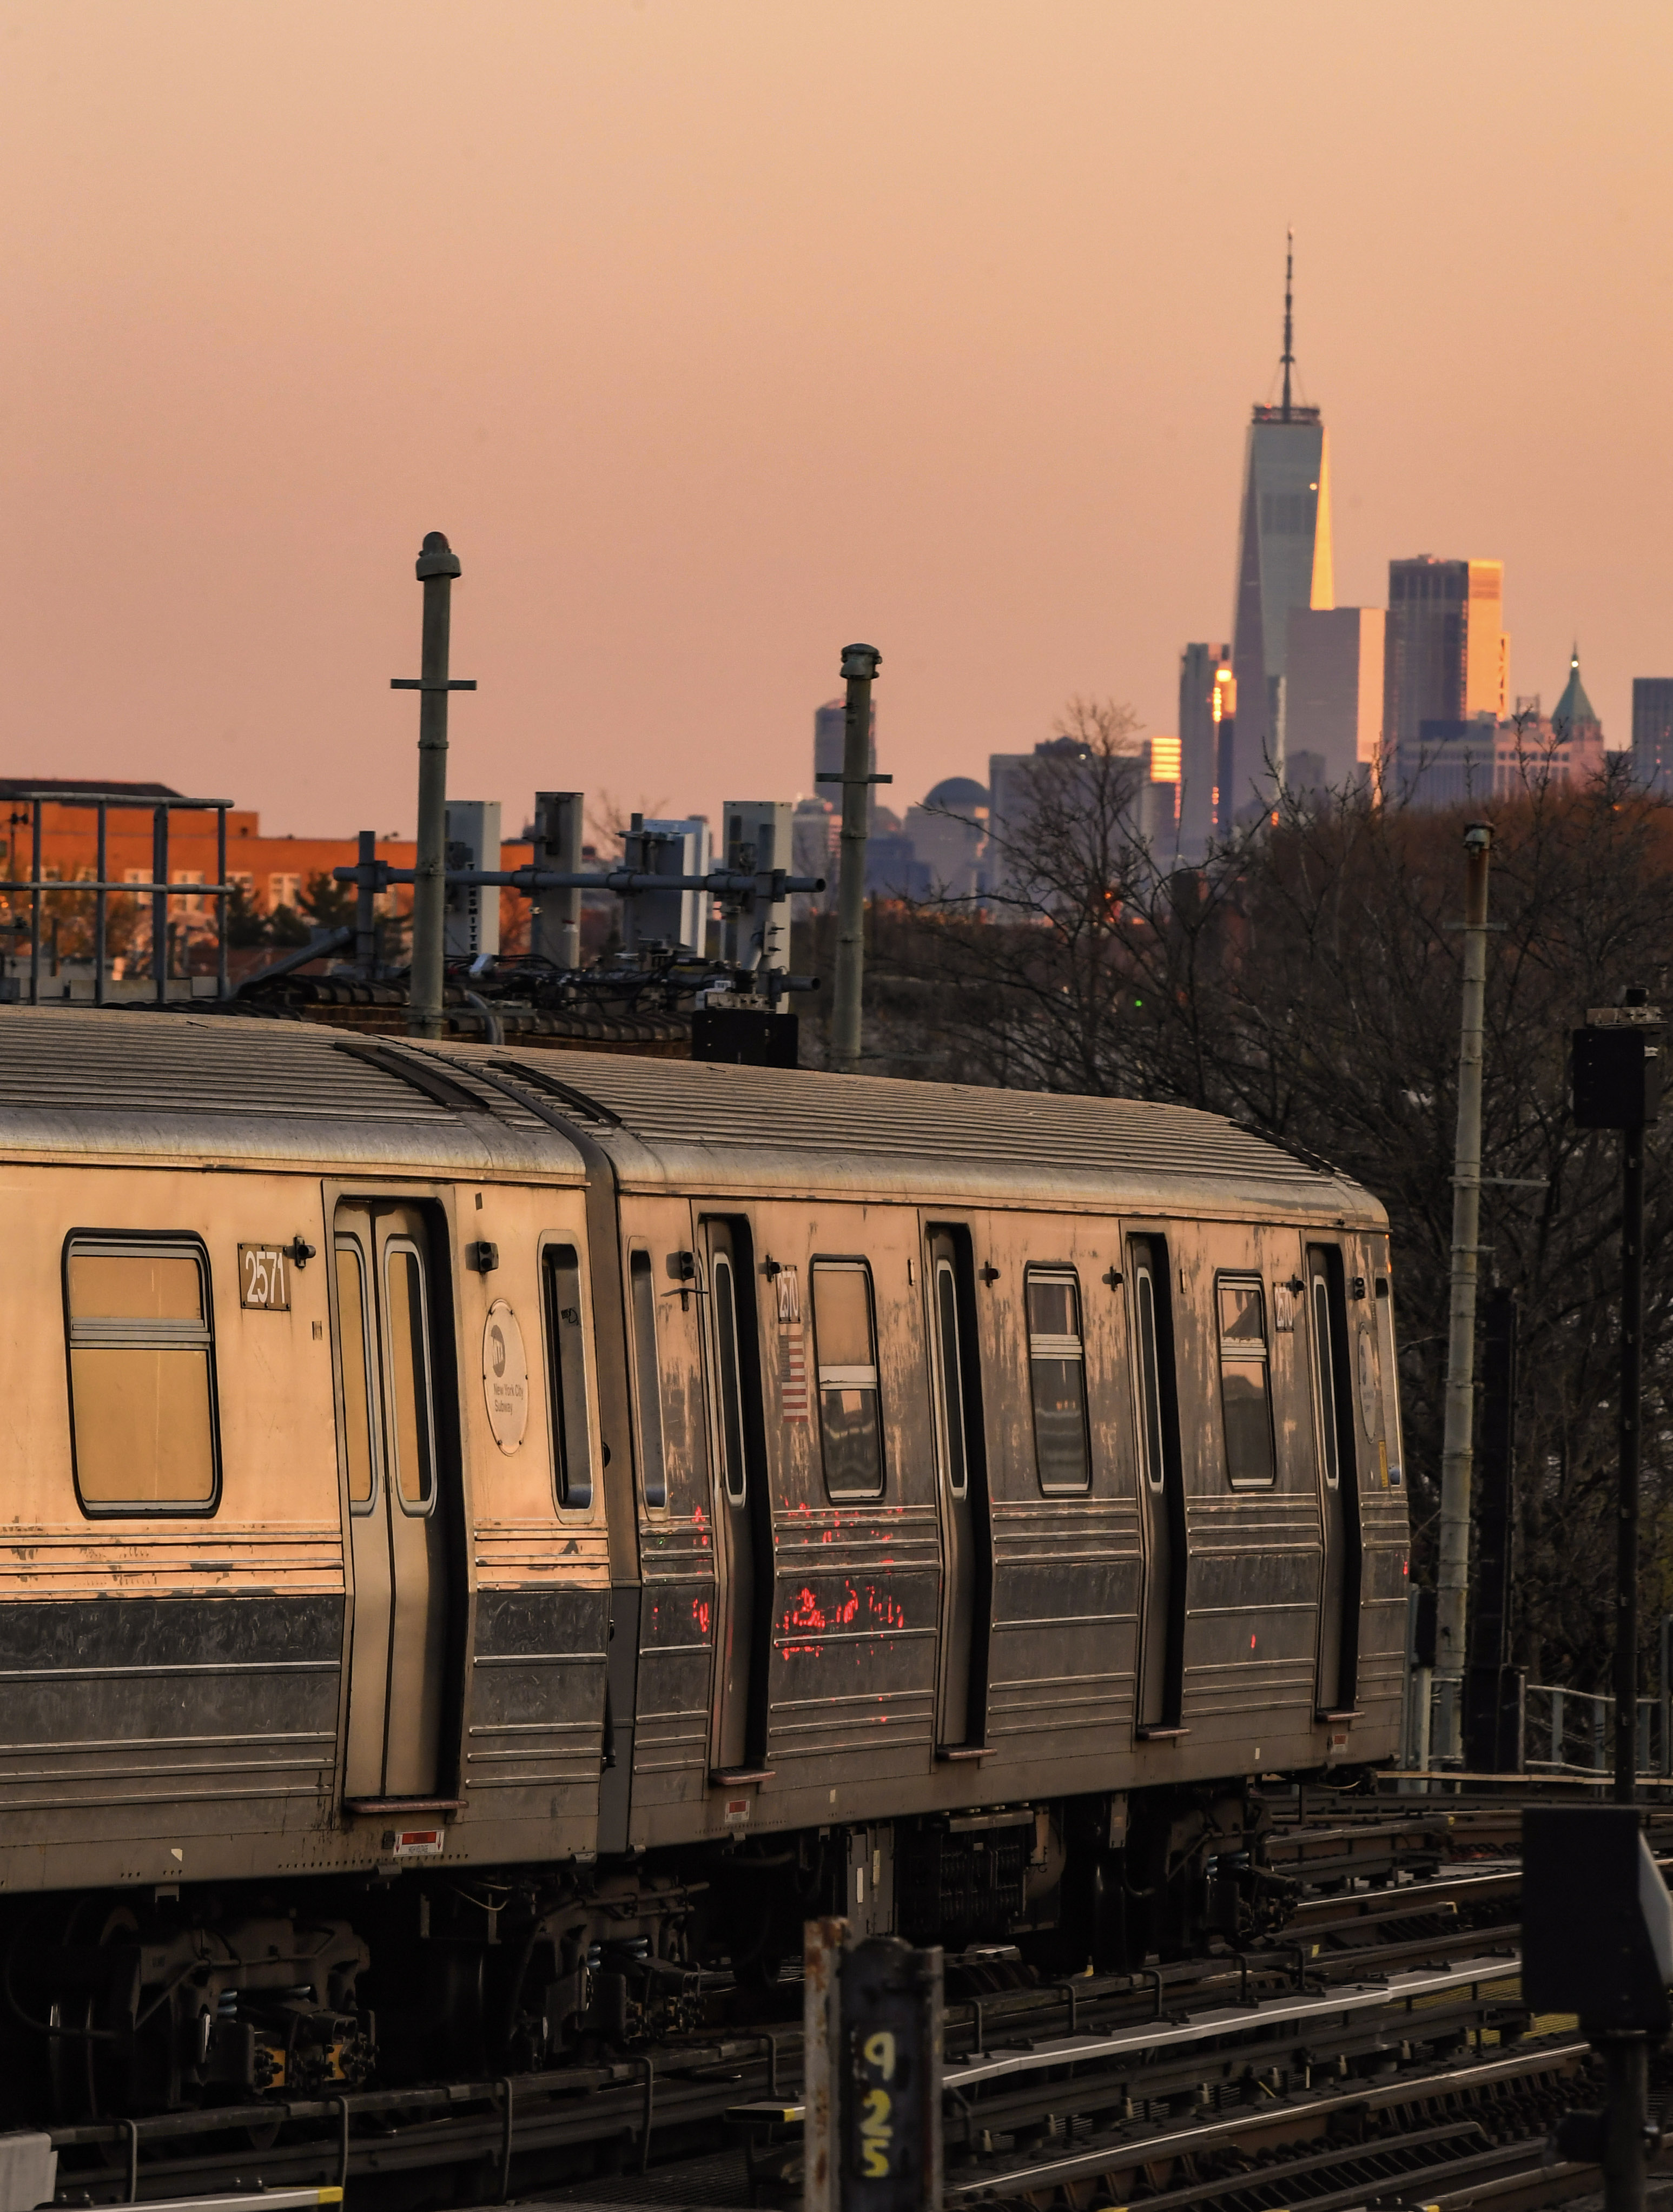 MTA Moving Forward with Capital Projects to Improve Transit Equity